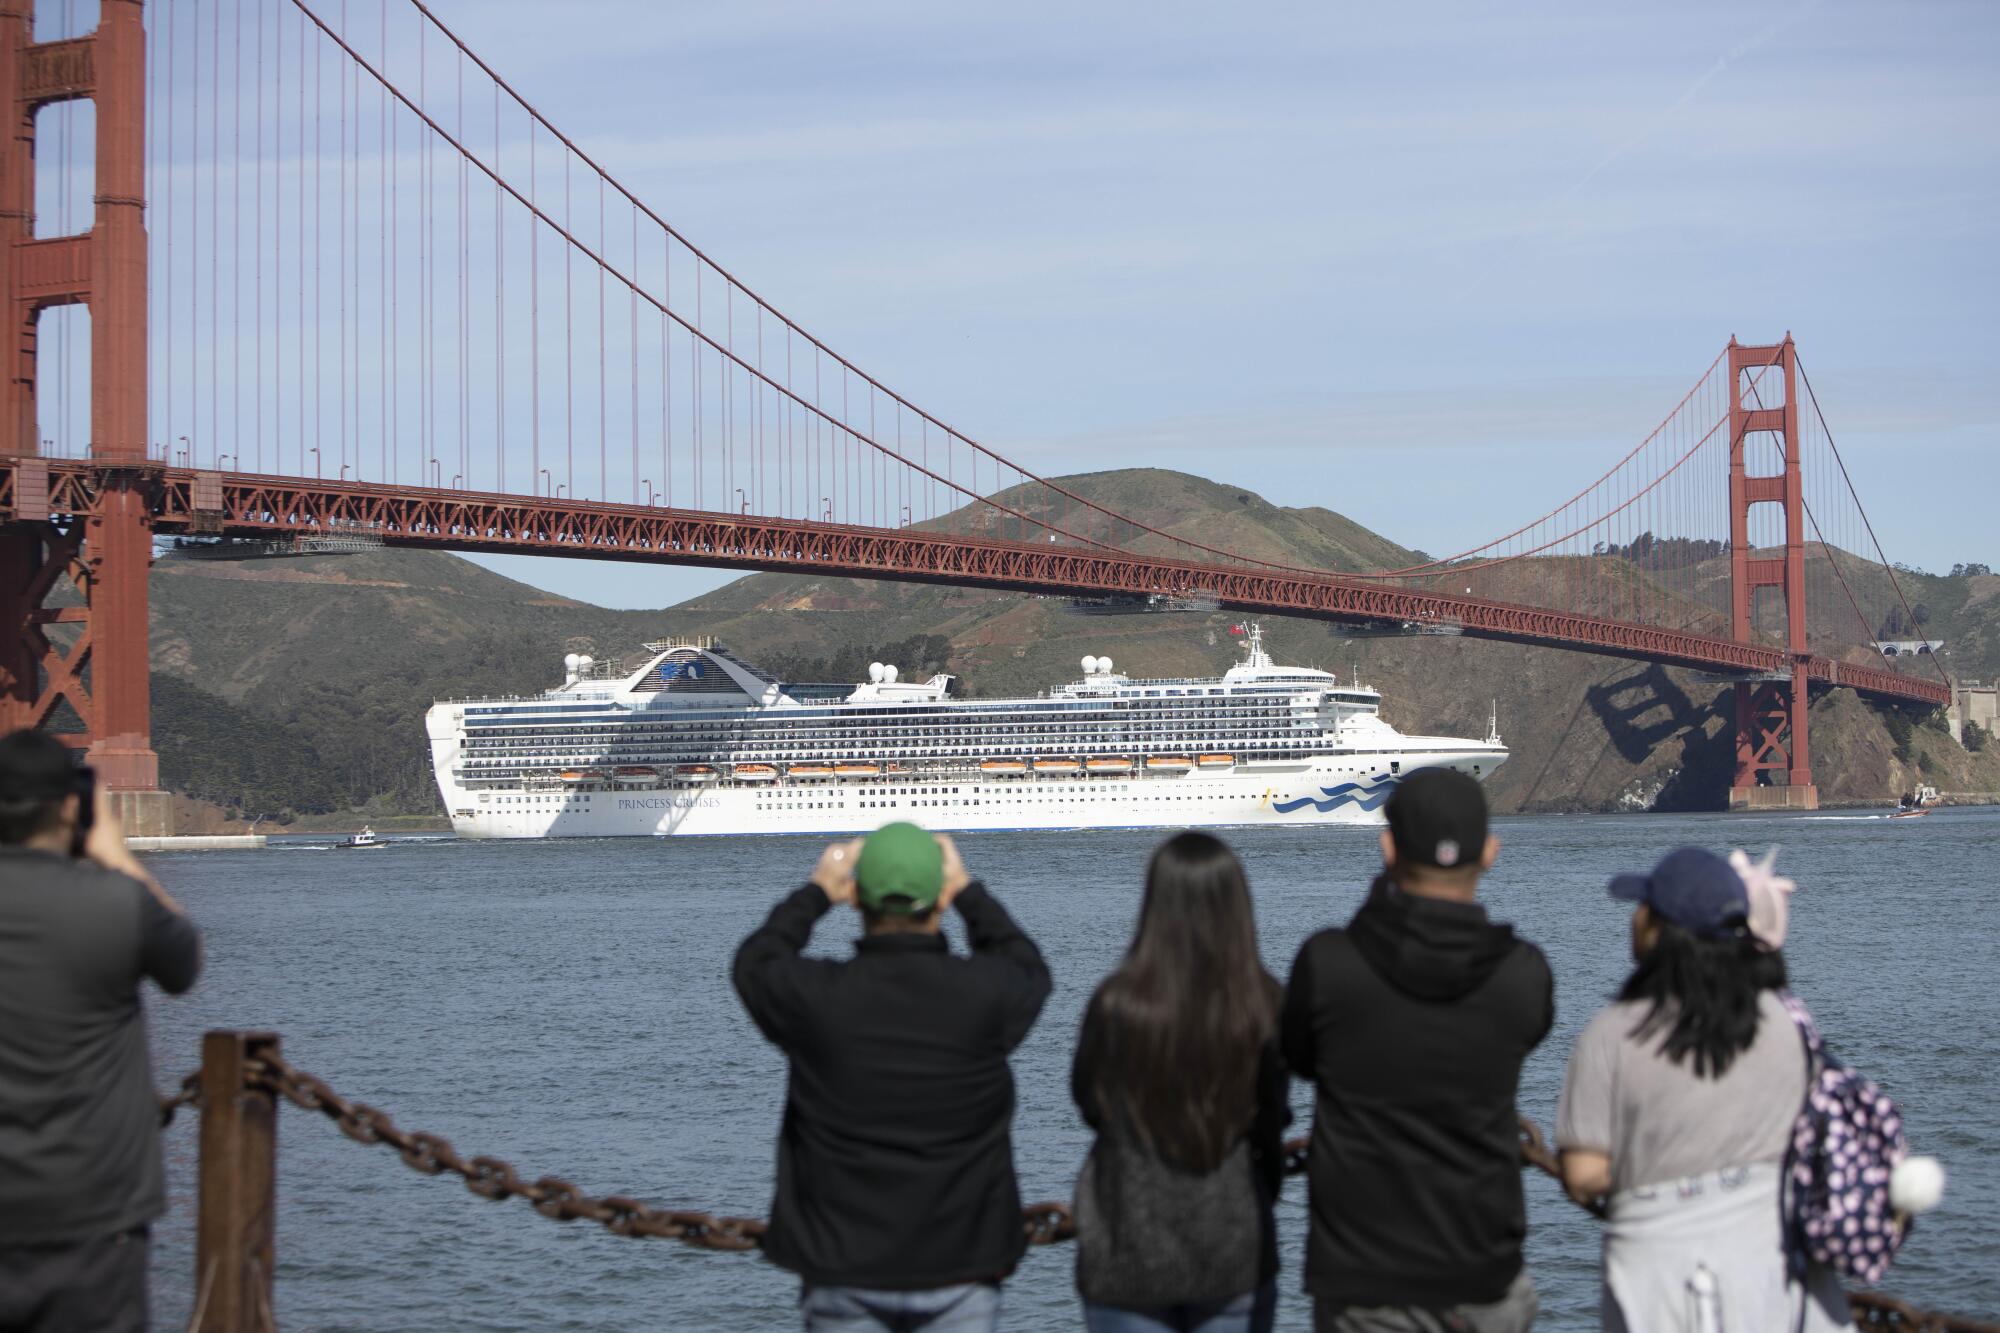 The Grand Princess cruise ship passes under the Golden Gate Bridge to dock at the Port of Oakland.